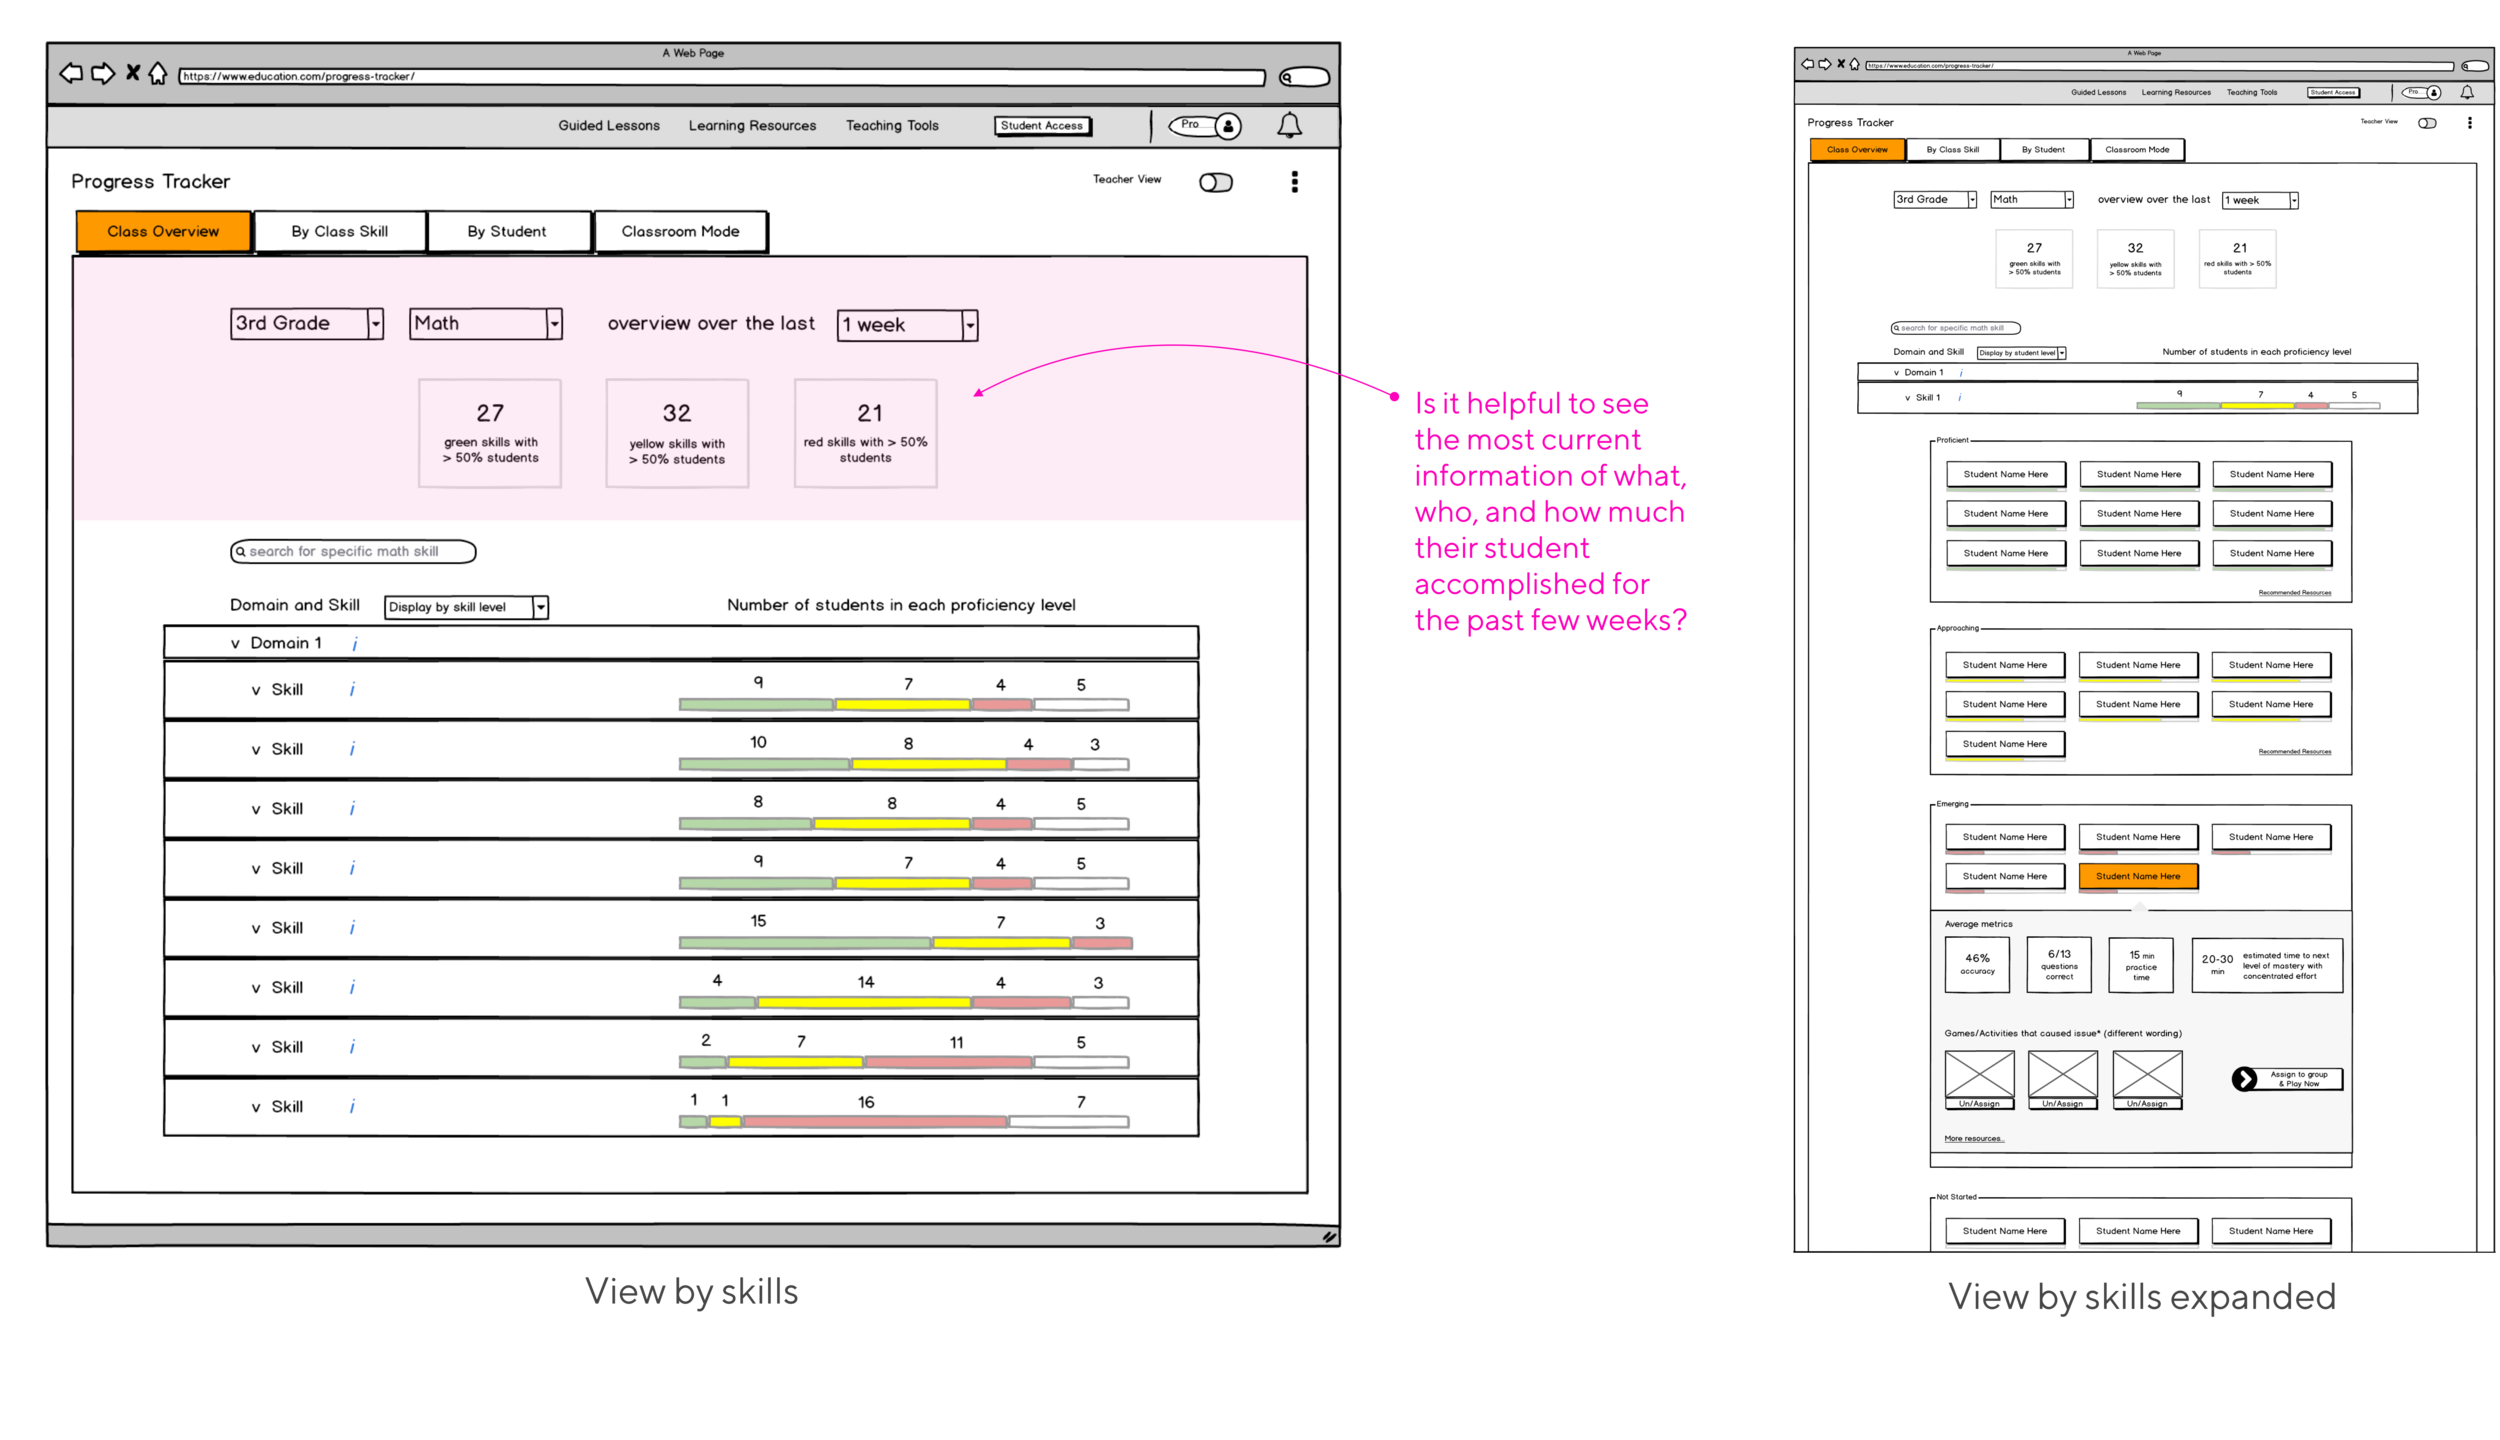 pt-teachers-wireframes-1-skill-view.png